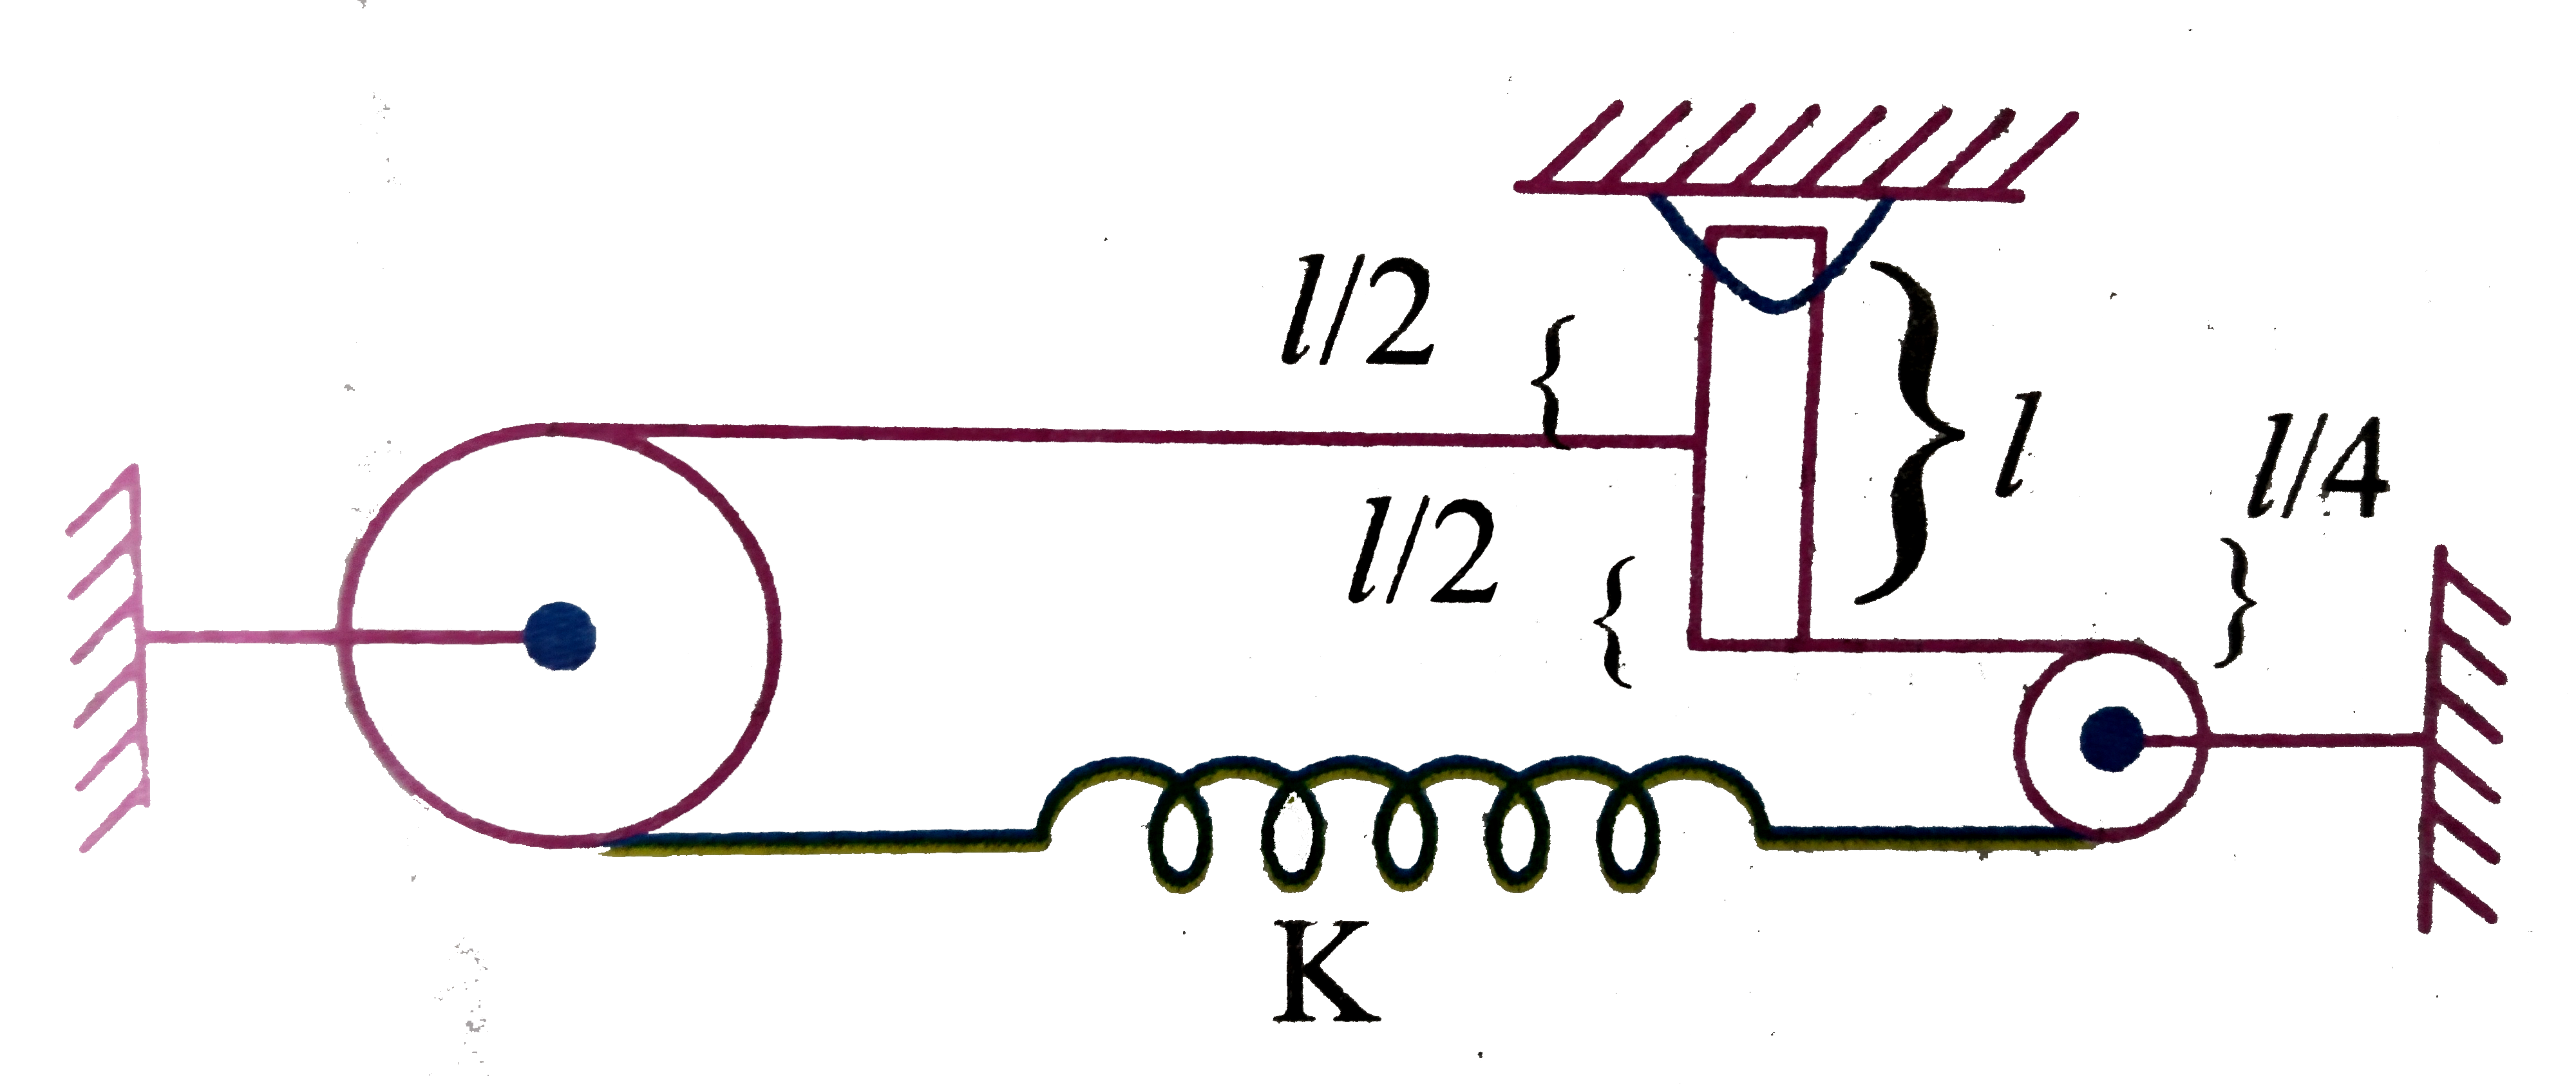 A light inextensible string carrying a springs is passed over two smooth fixed pulles as shown. If the rod is slightly displaced about the hinge form is equilibrium position, then time period is.